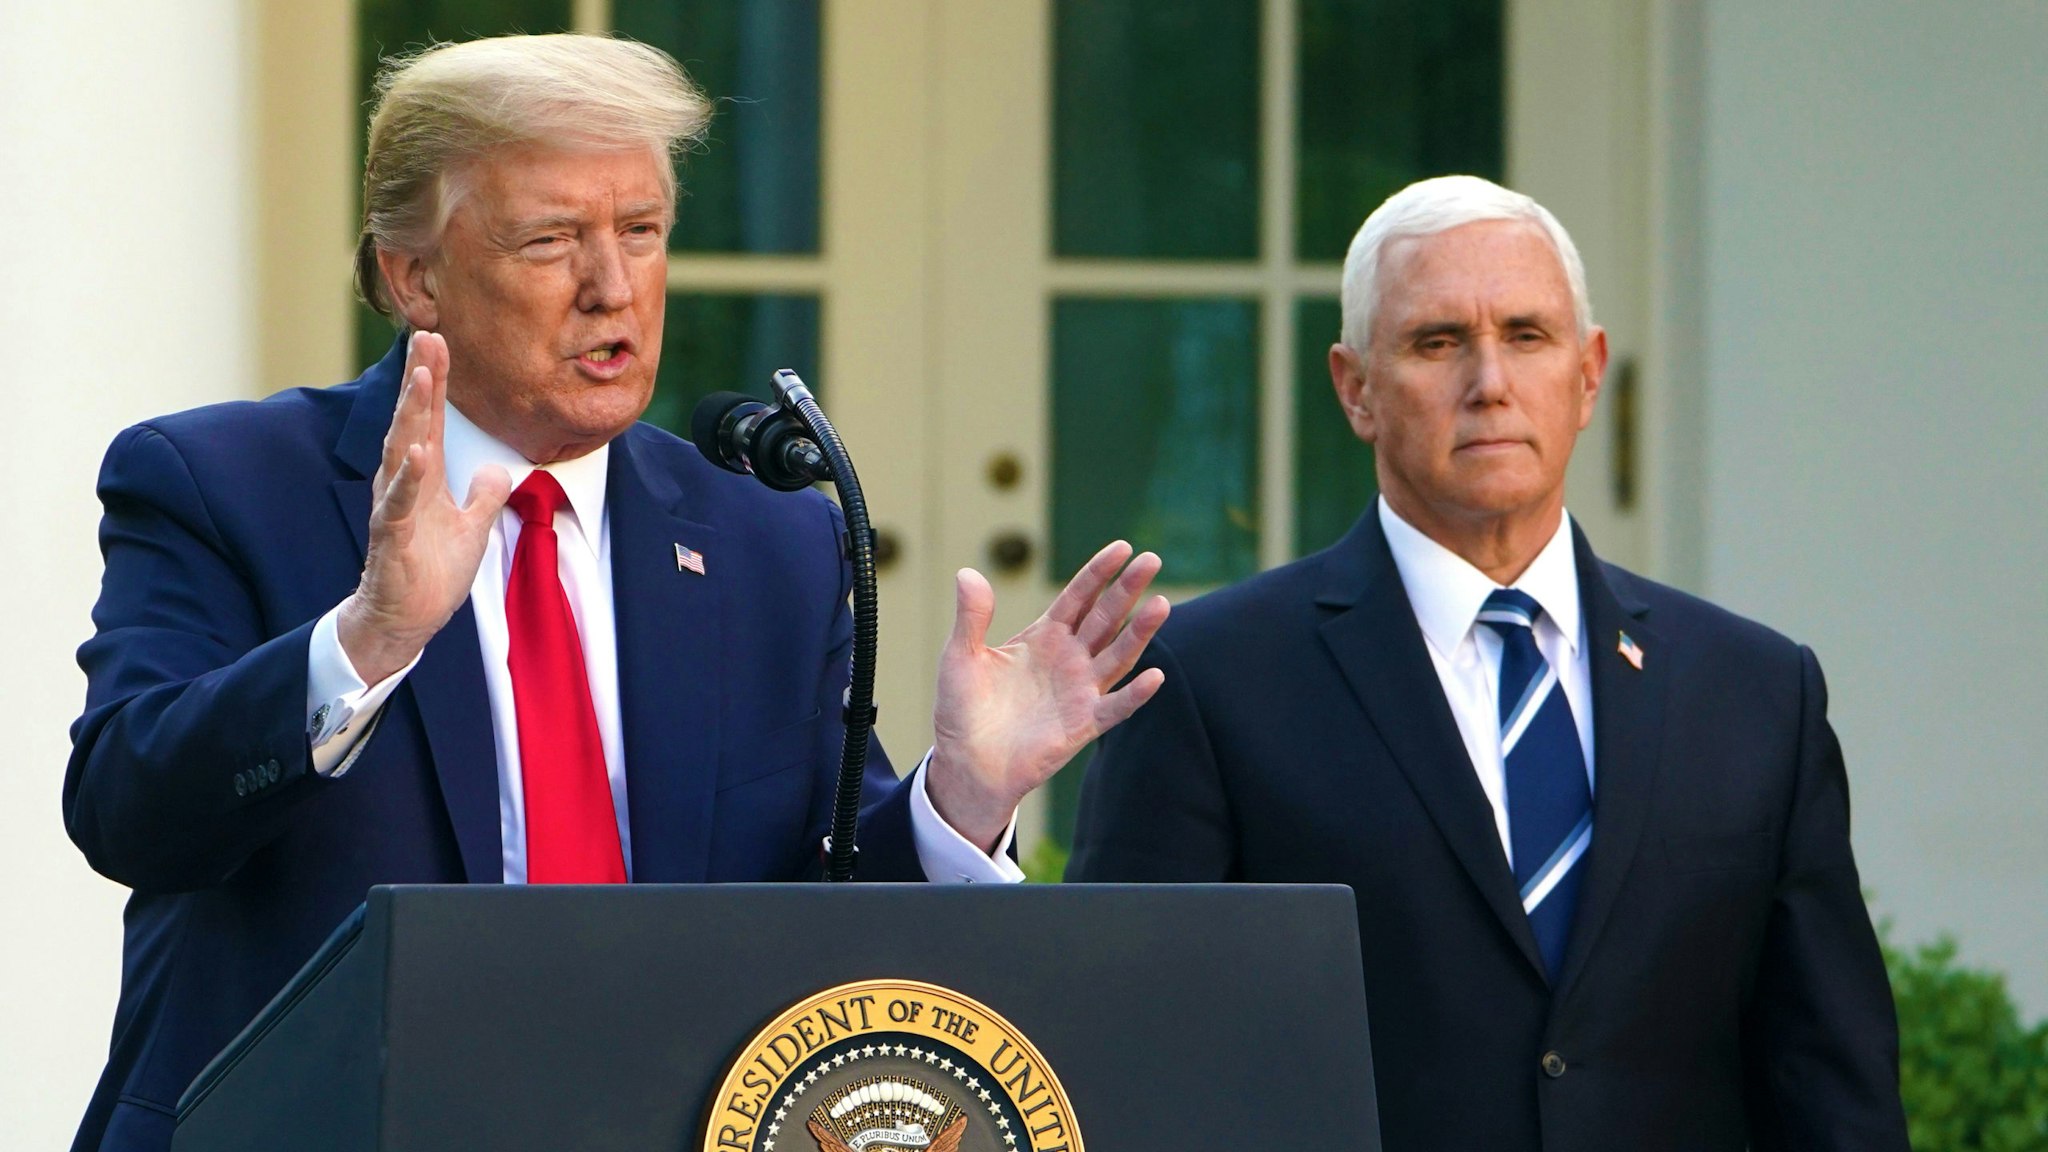 US President Donald Trump speaks as US Vice President Mike Pence look on during a news conference on the novel coronavirus, COVID-19, in the Rose Garden of the White House in Washington, DC on April 27, 2020.